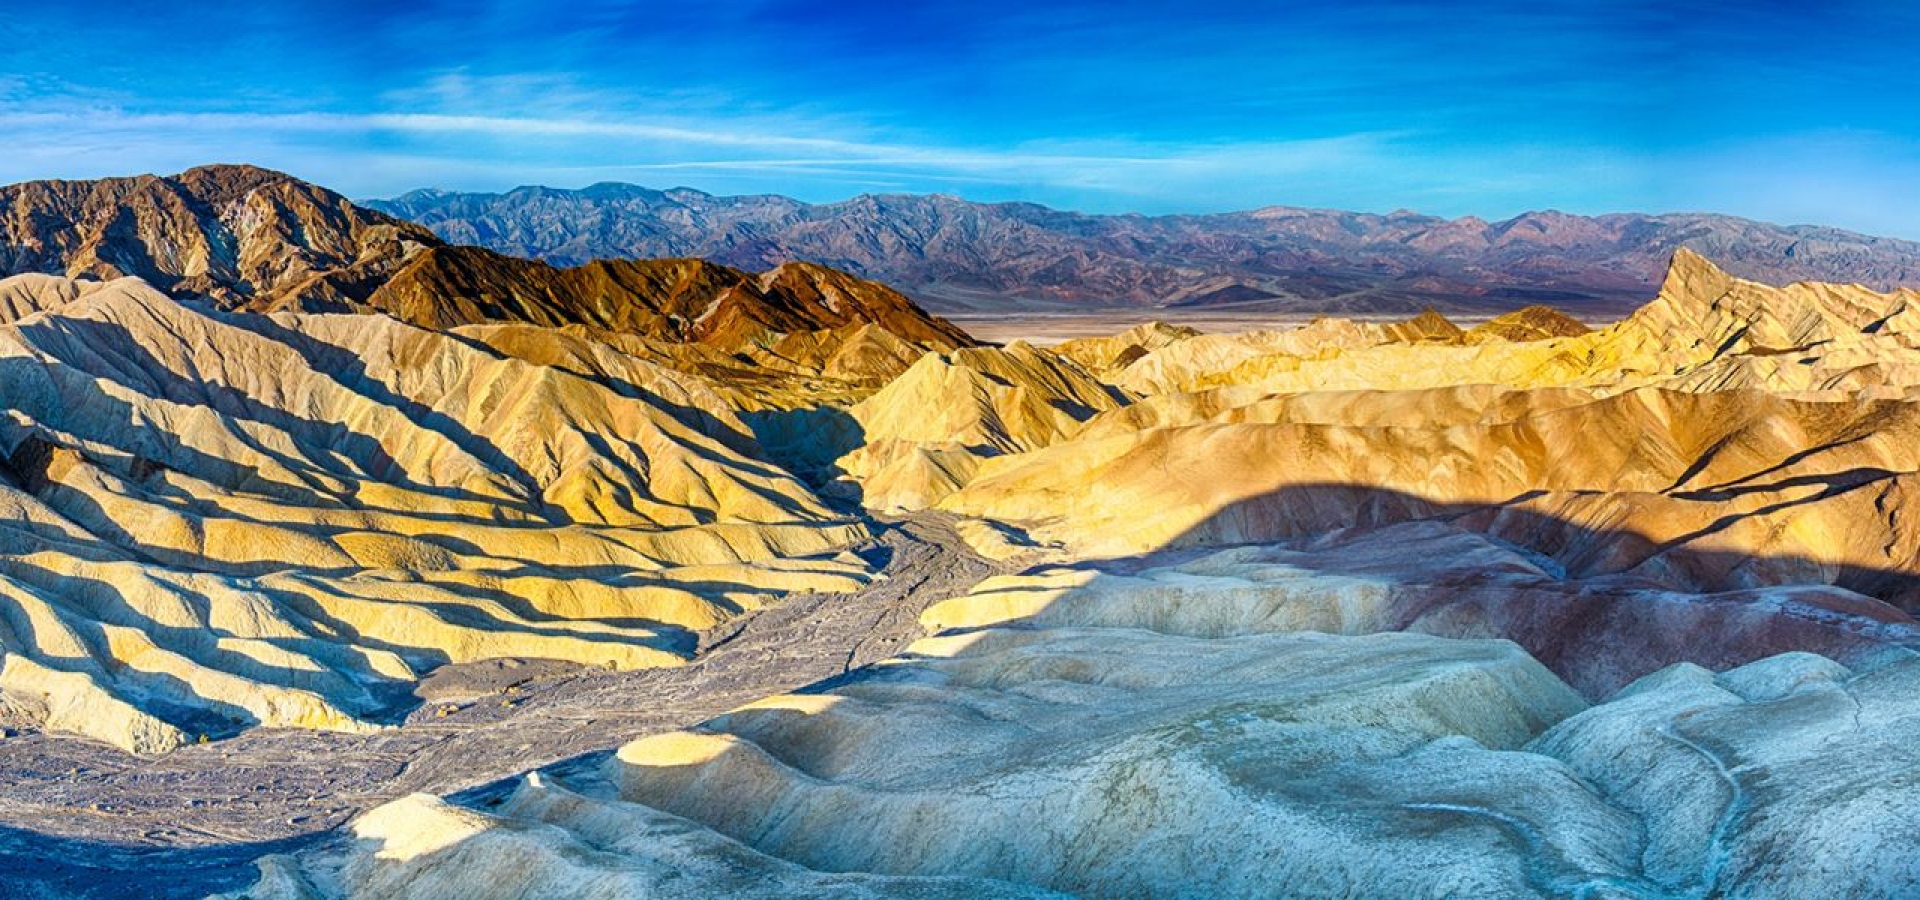 Death Valley National Park, CA by Rail